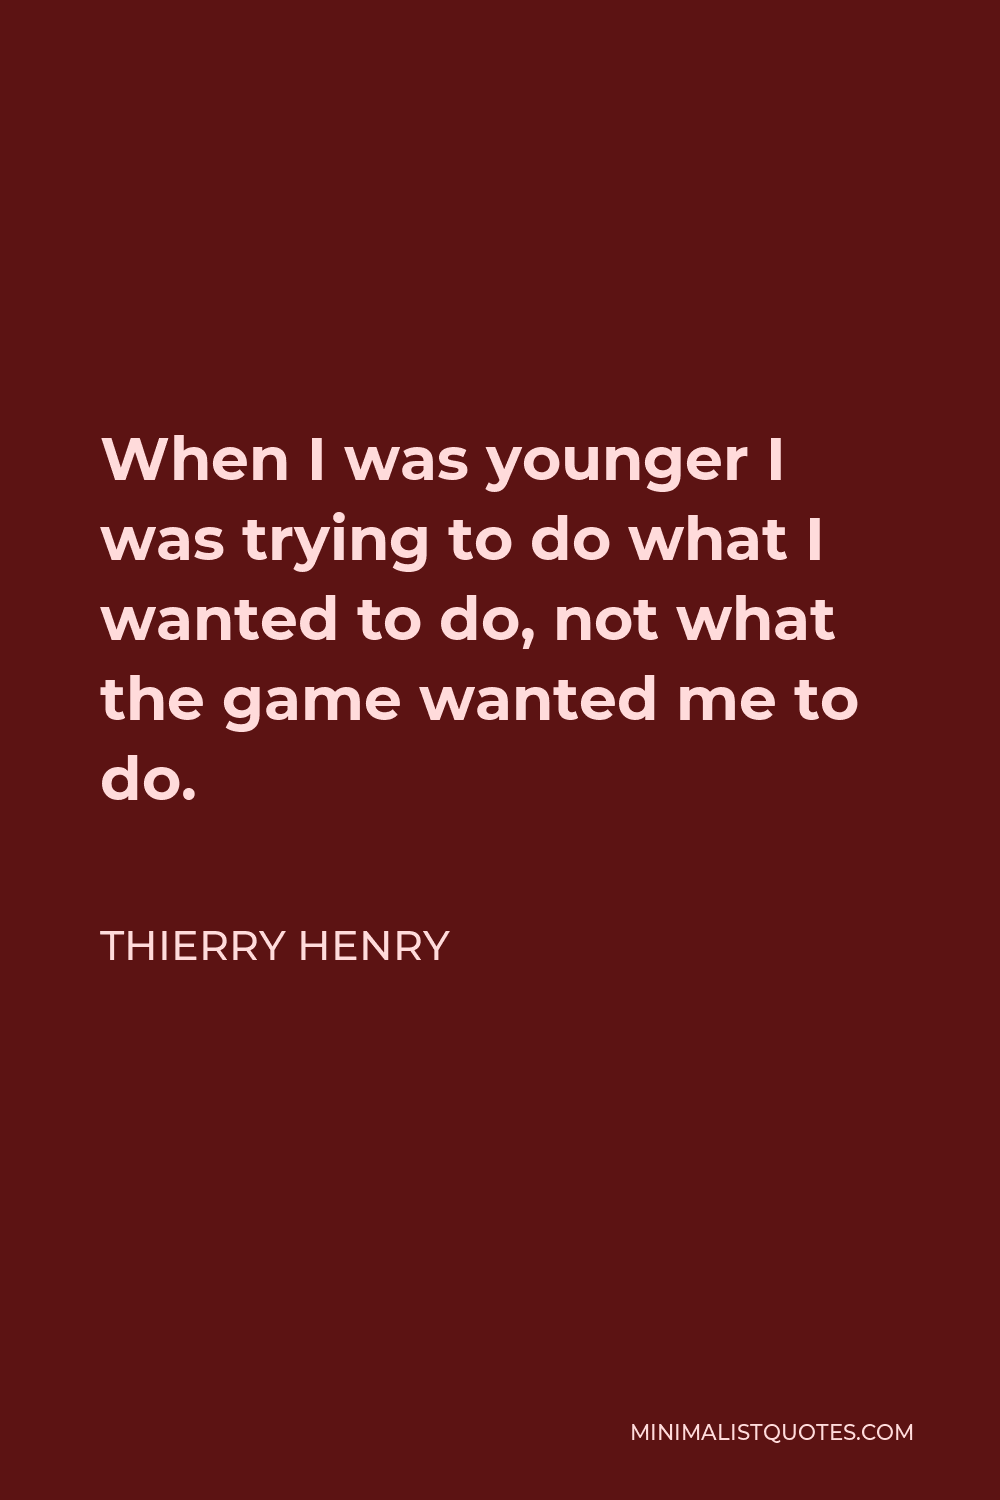 Thierry Henry Quote - When I was younger I was trying to do what I wanted to do, not what the game wanted me to do.